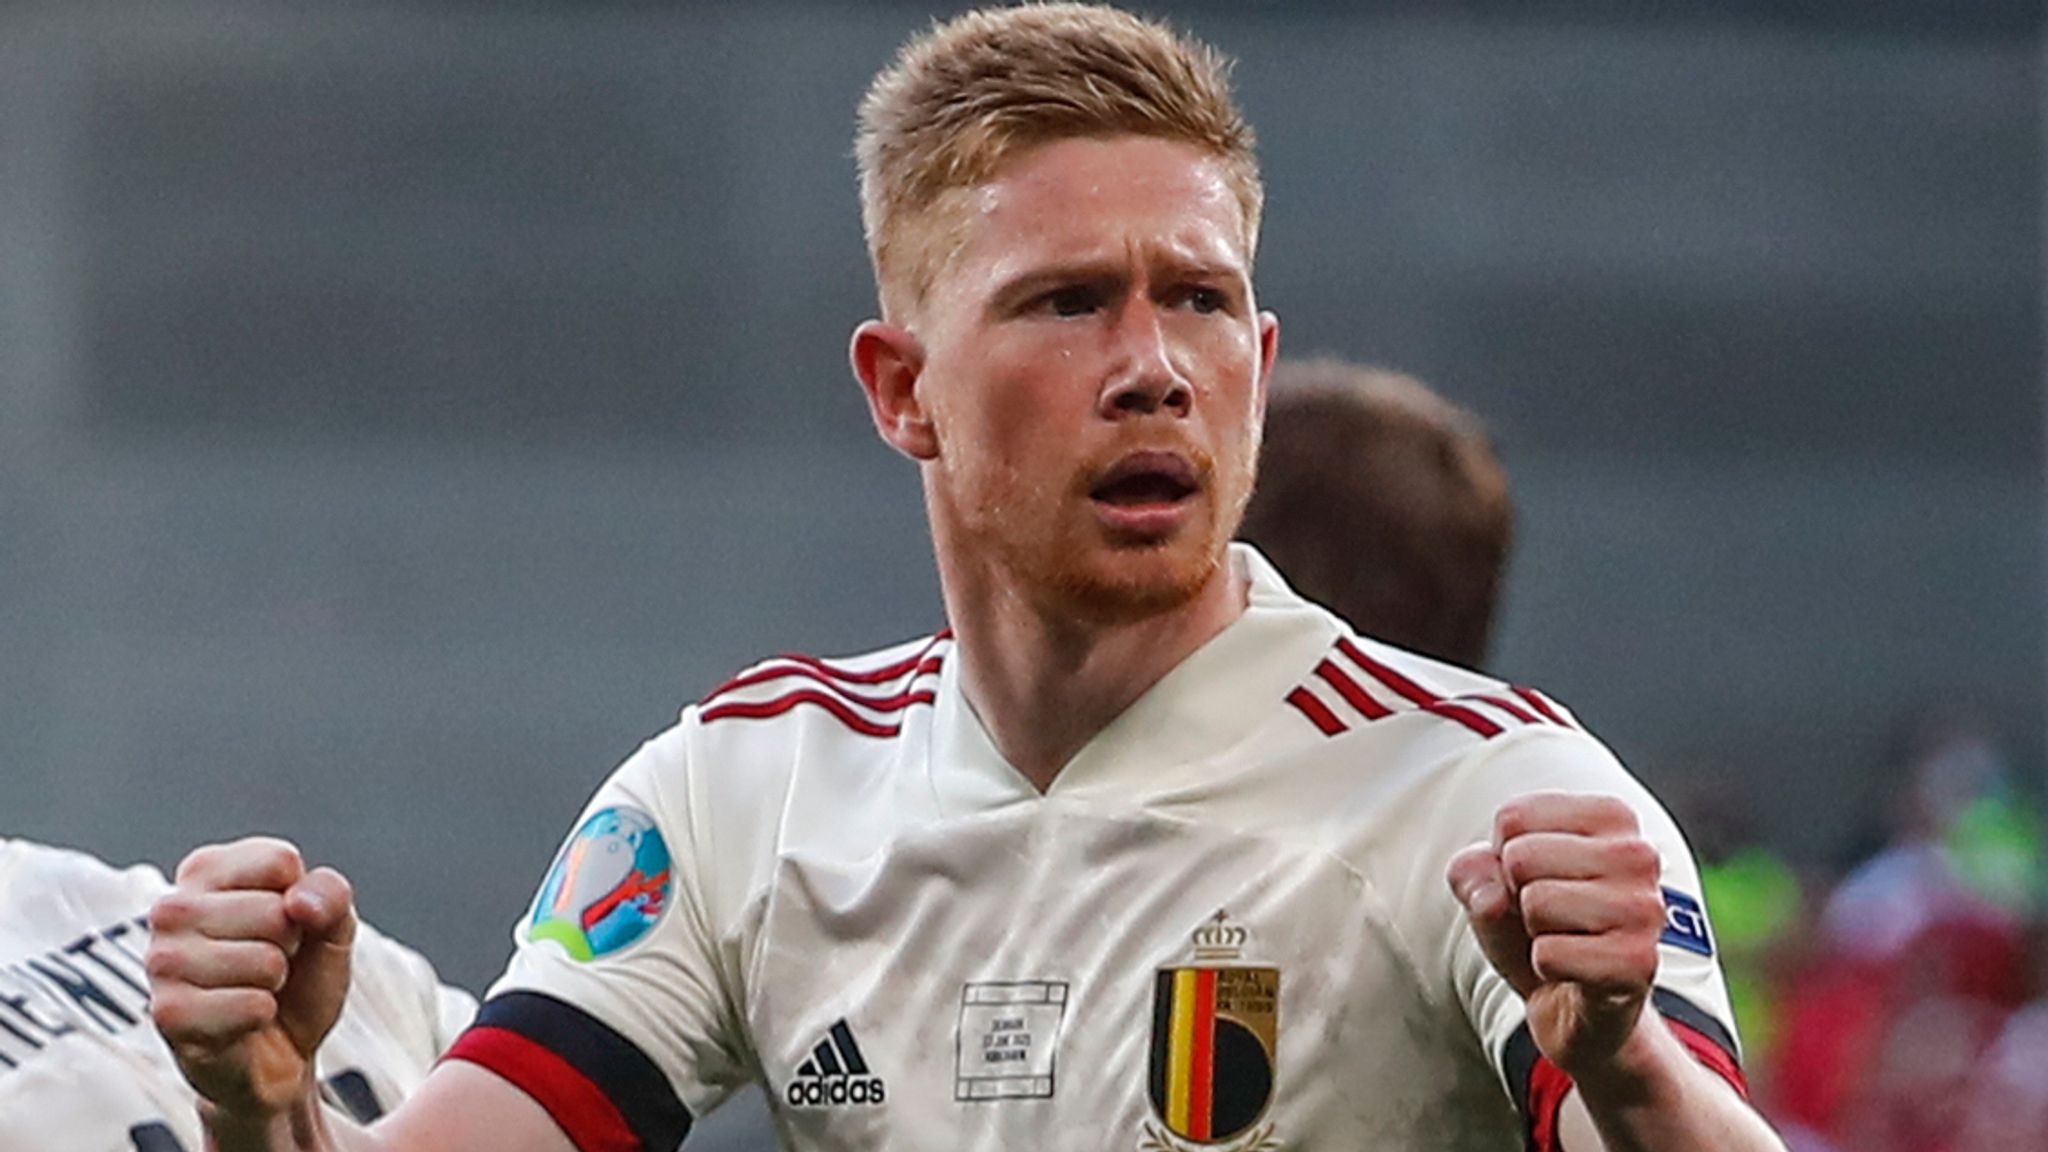 Denmark 1-2 Belgium: Kevin De Bruyne inspires Red Devils to victory as they  reach Euro 2020 last 16 | Football News | Sky Sports